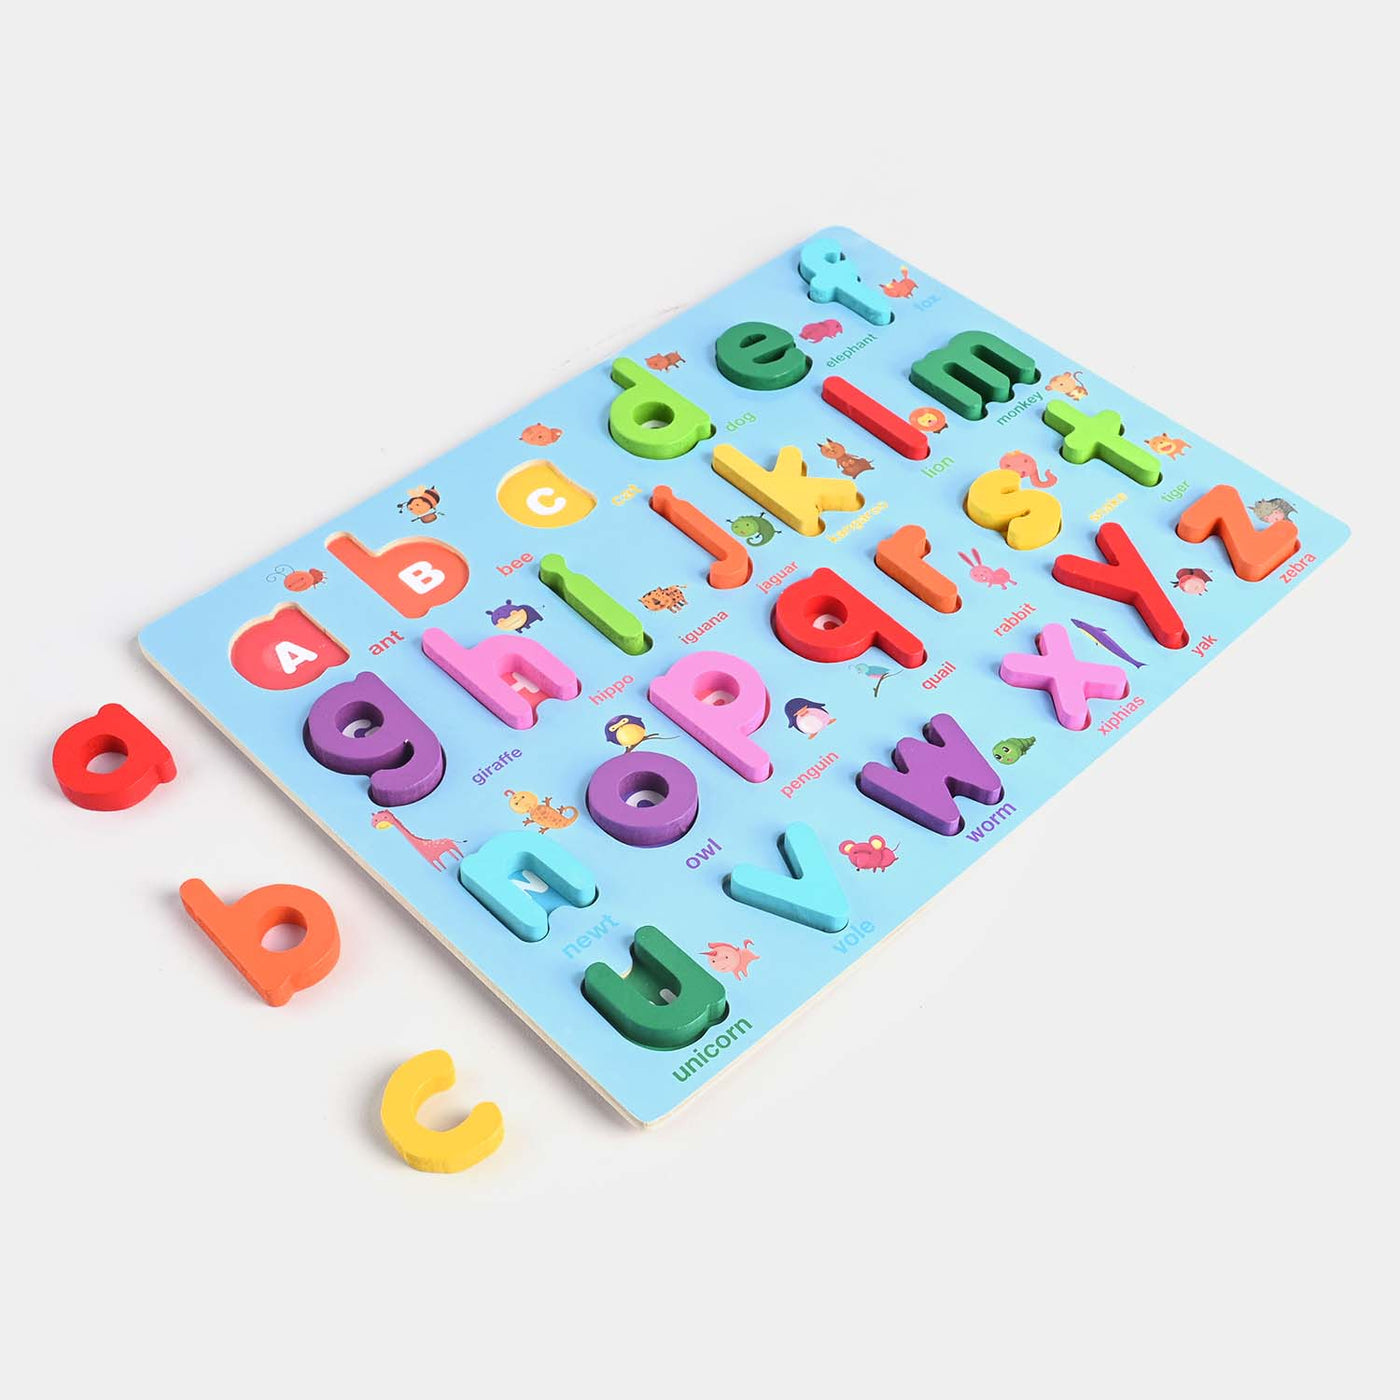 Wooden Small Alphabets Sorting Boards